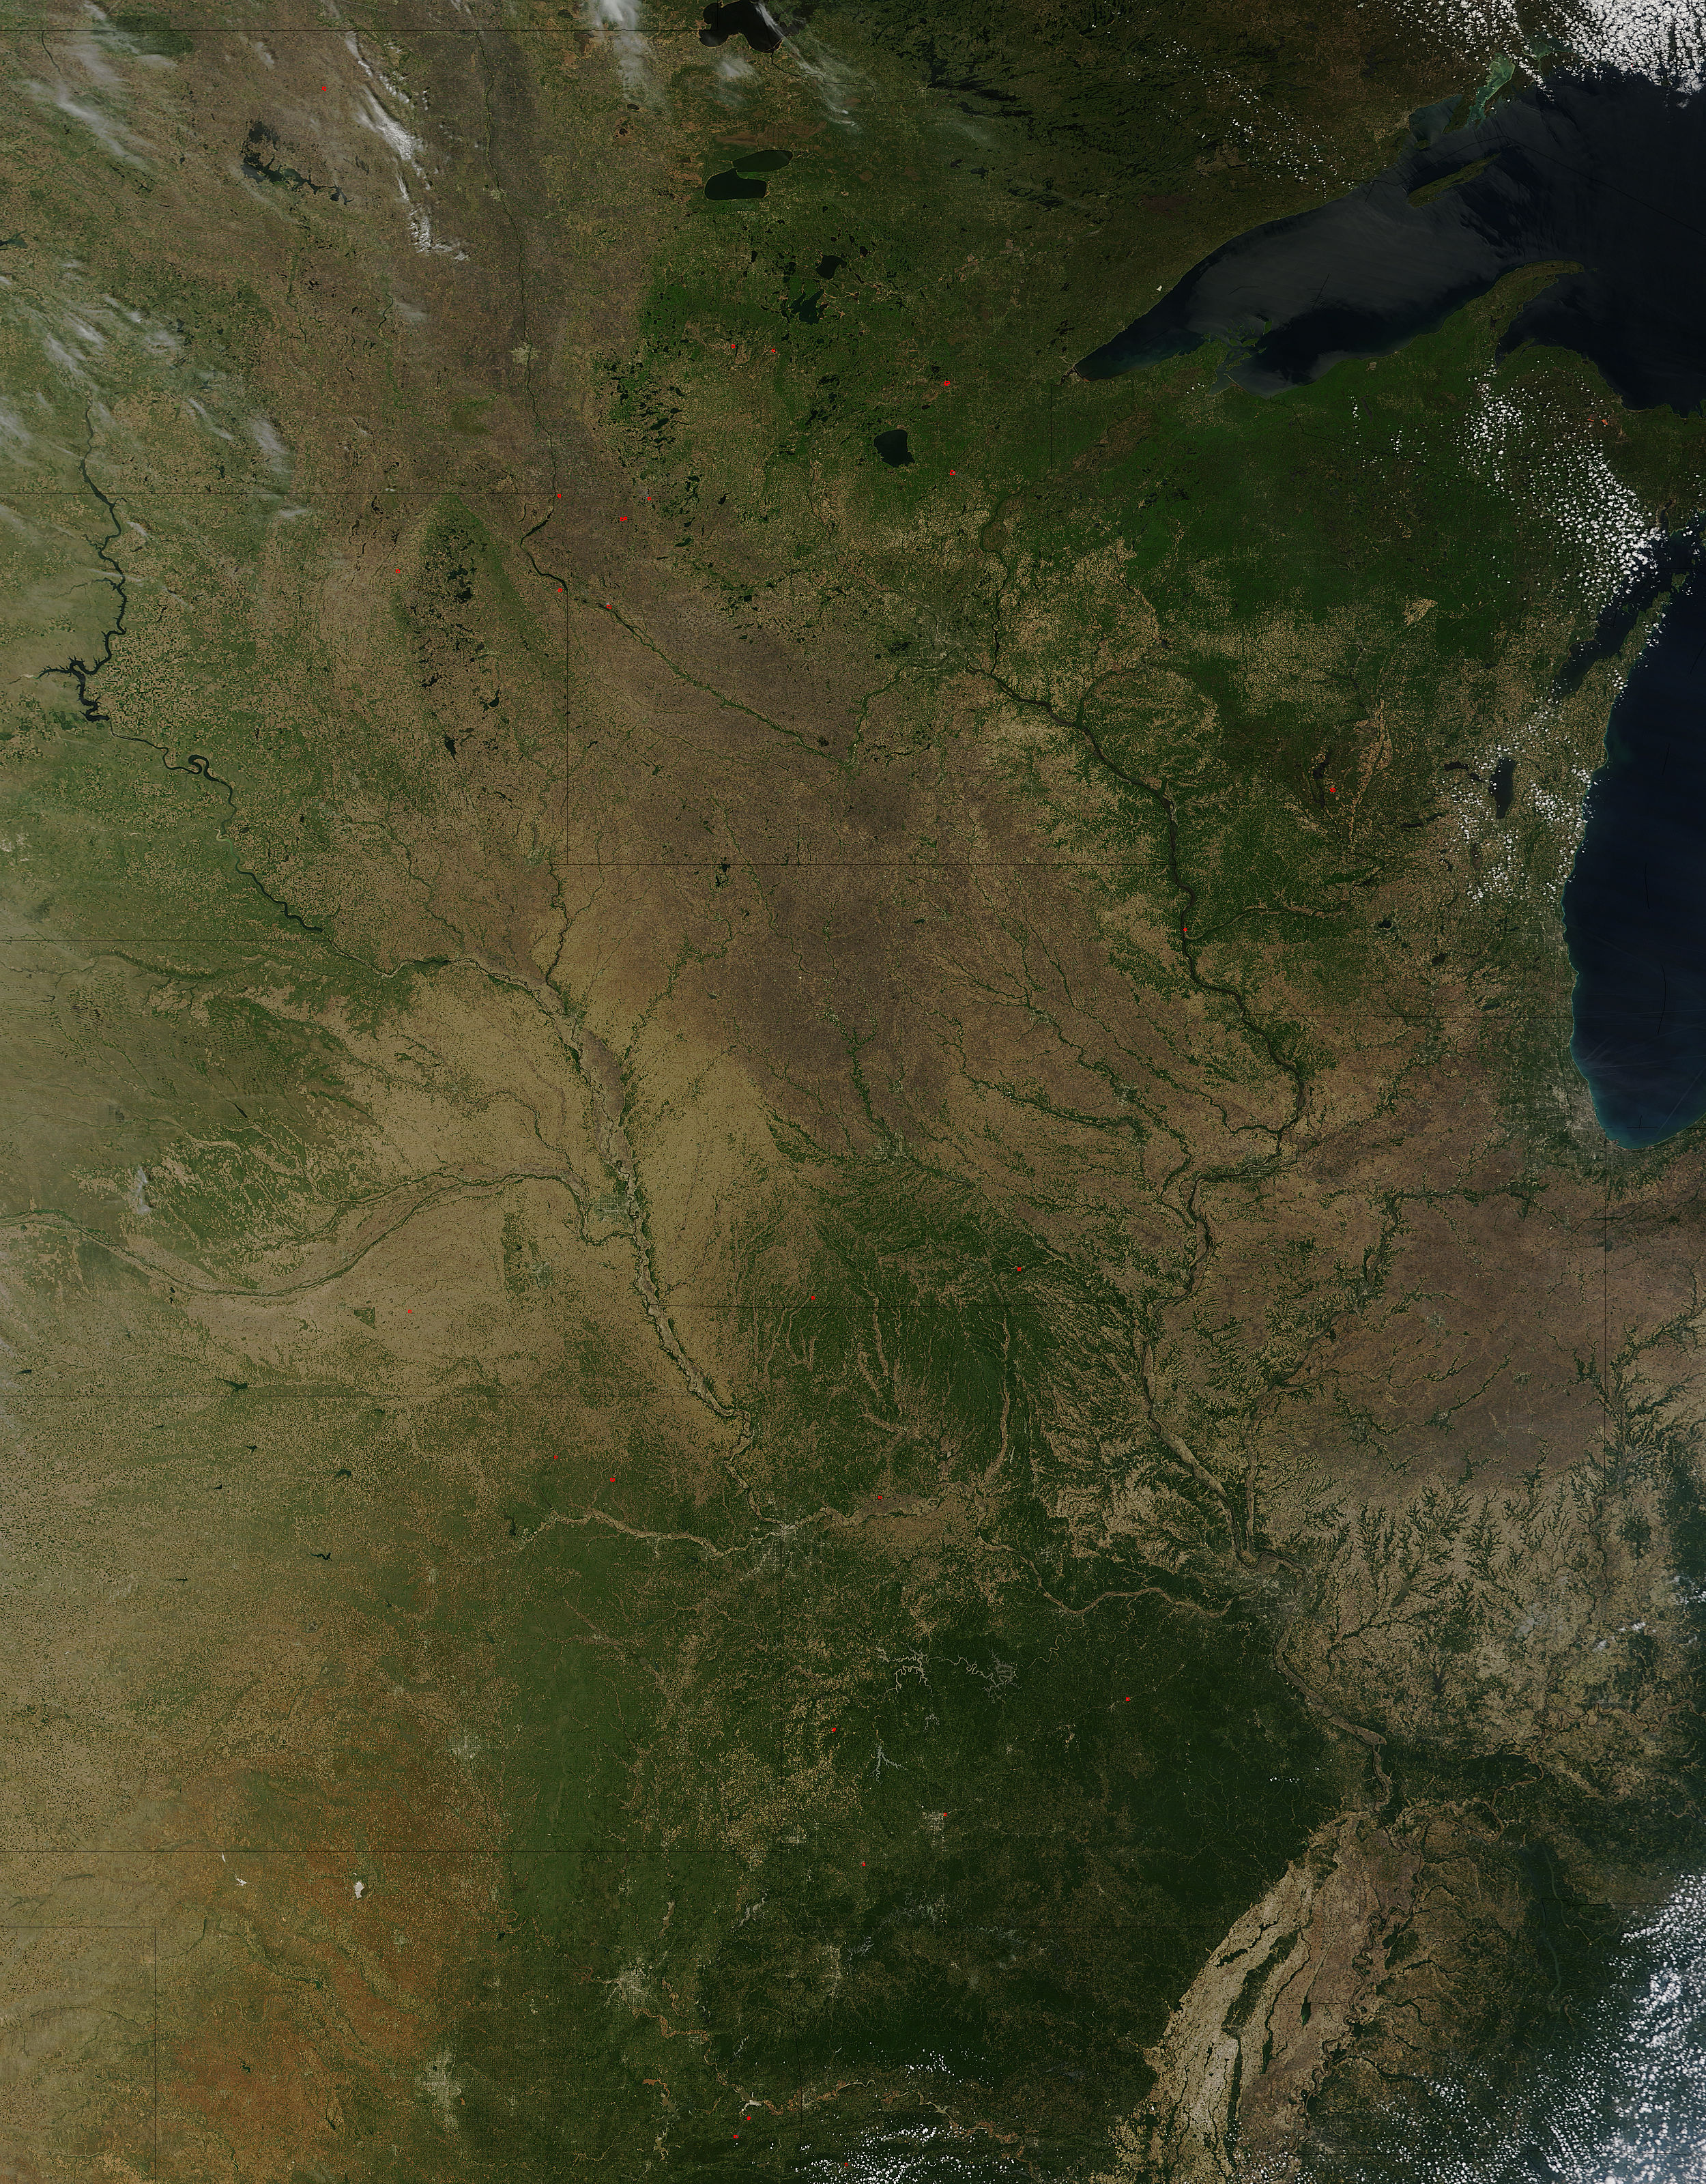 Upper Midwest, United States - related image preview